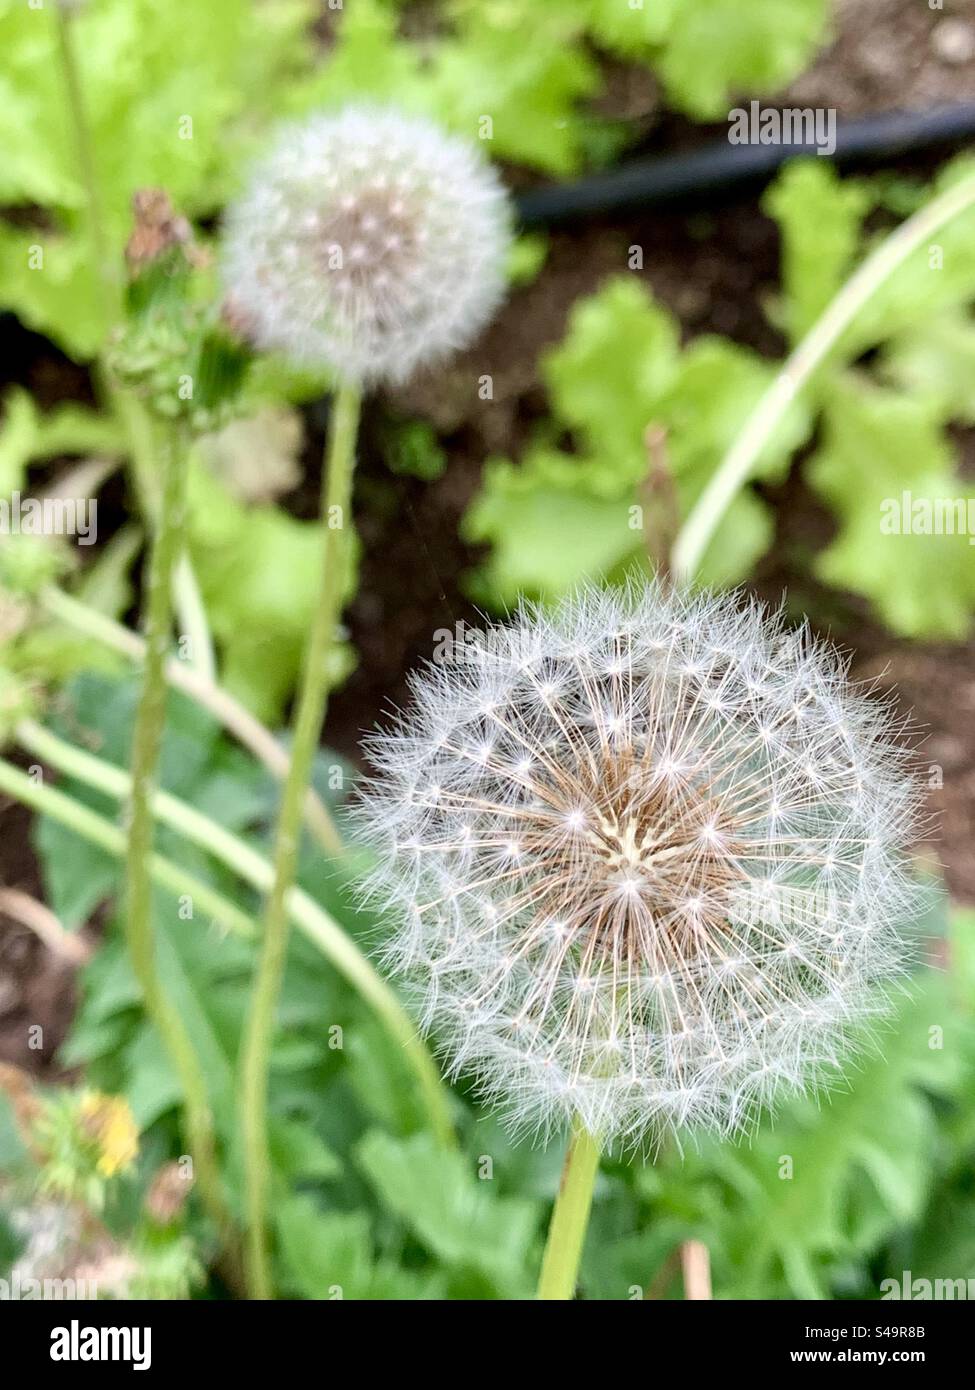 Hairy balls glisten in a garden. Also known as balloon plant, balloon cotton-bush, swan plant, or Gomphocarpus physocarpus, is a species of plant in the family Apocynaceae, related to the milkweeds. Stock Photo